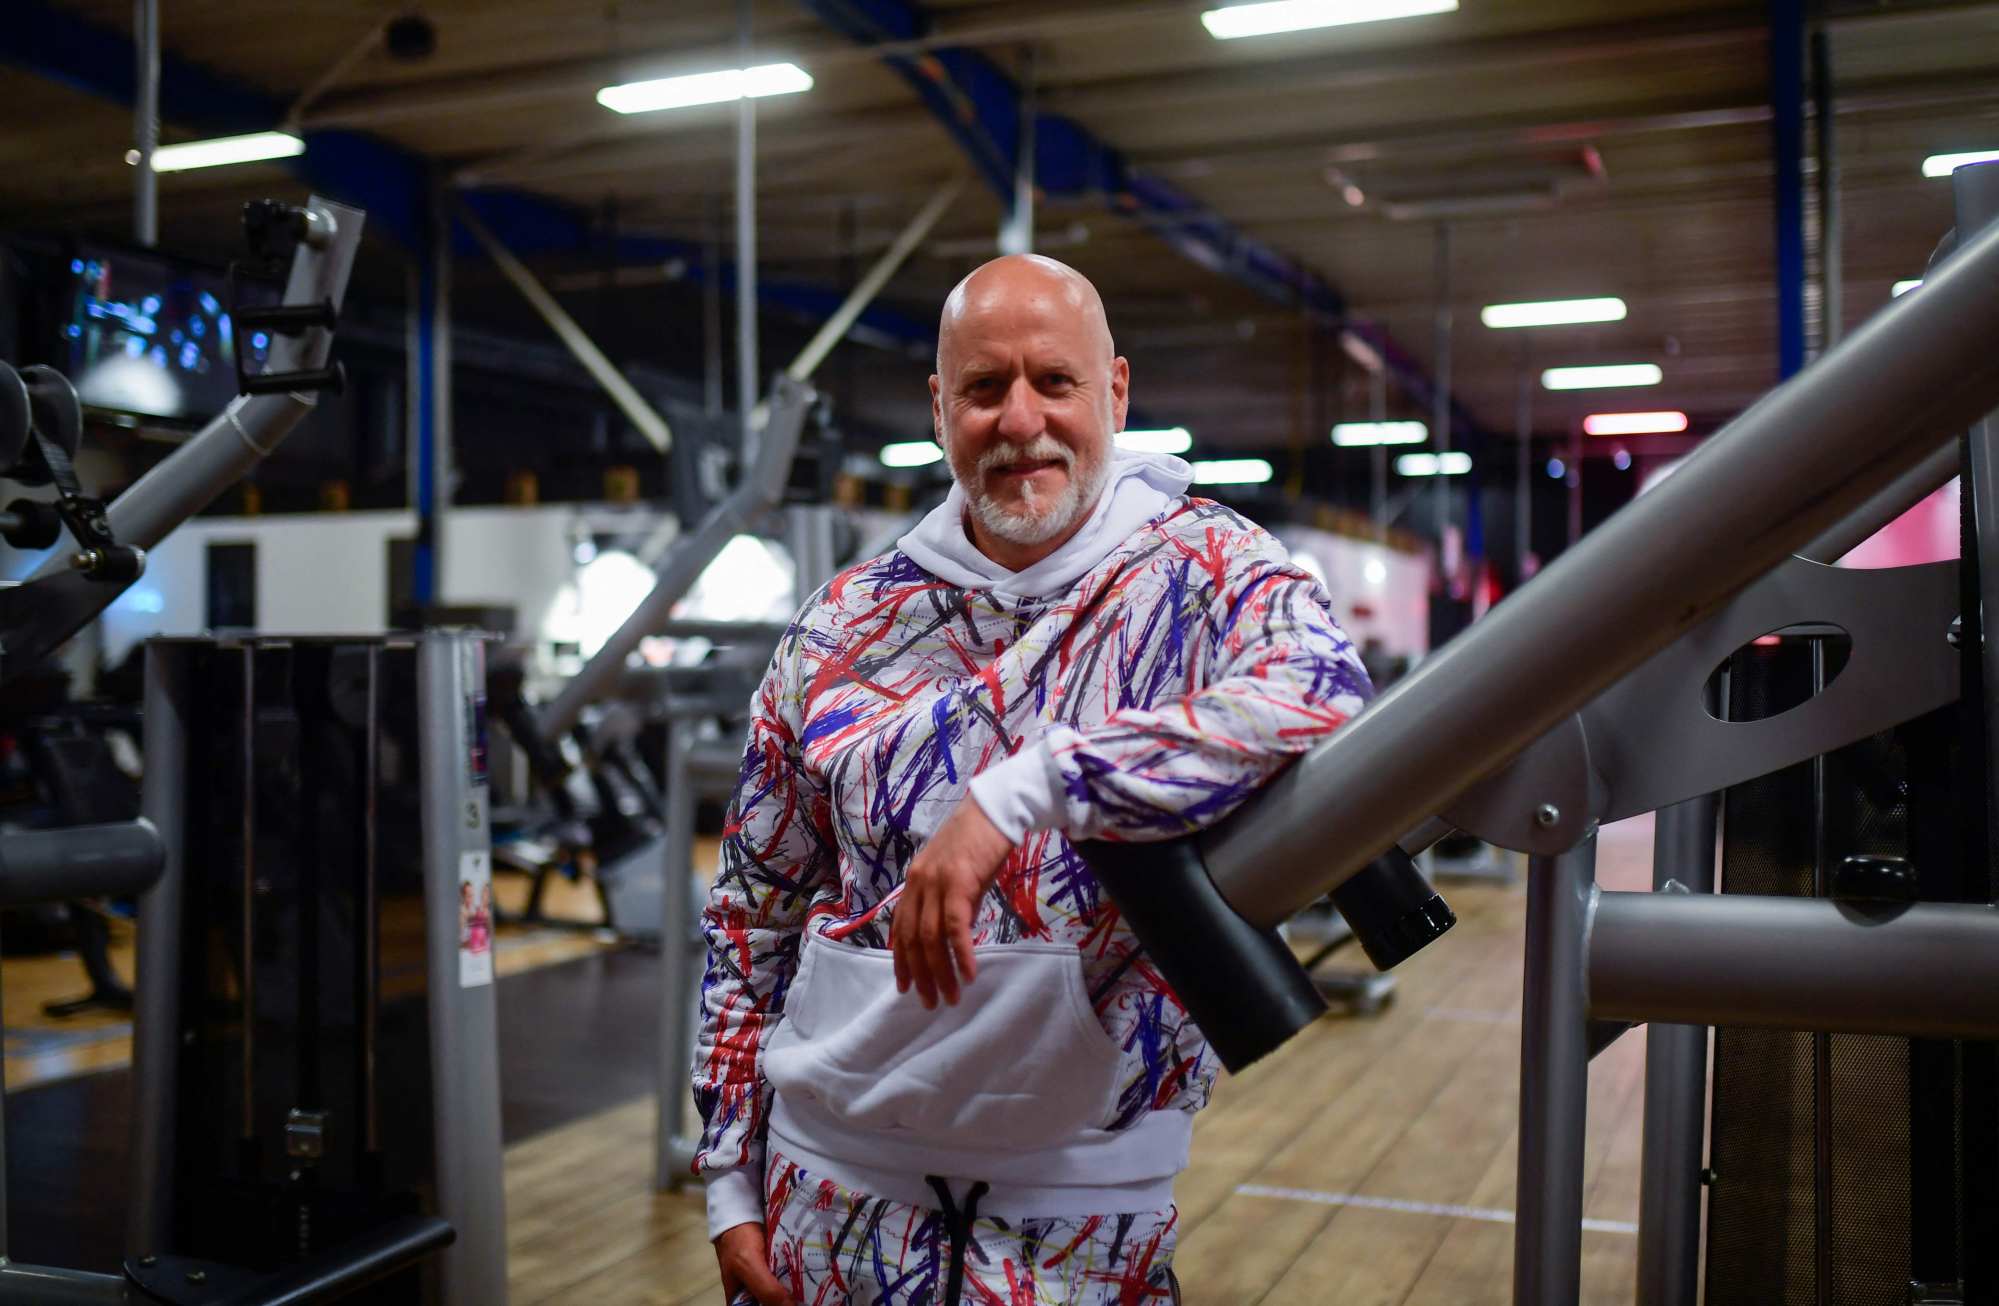 Love Parade organiser Rainer Schaller poses at the McFit Studio fitness centre in Cologne, western Germany. Photo: AFP